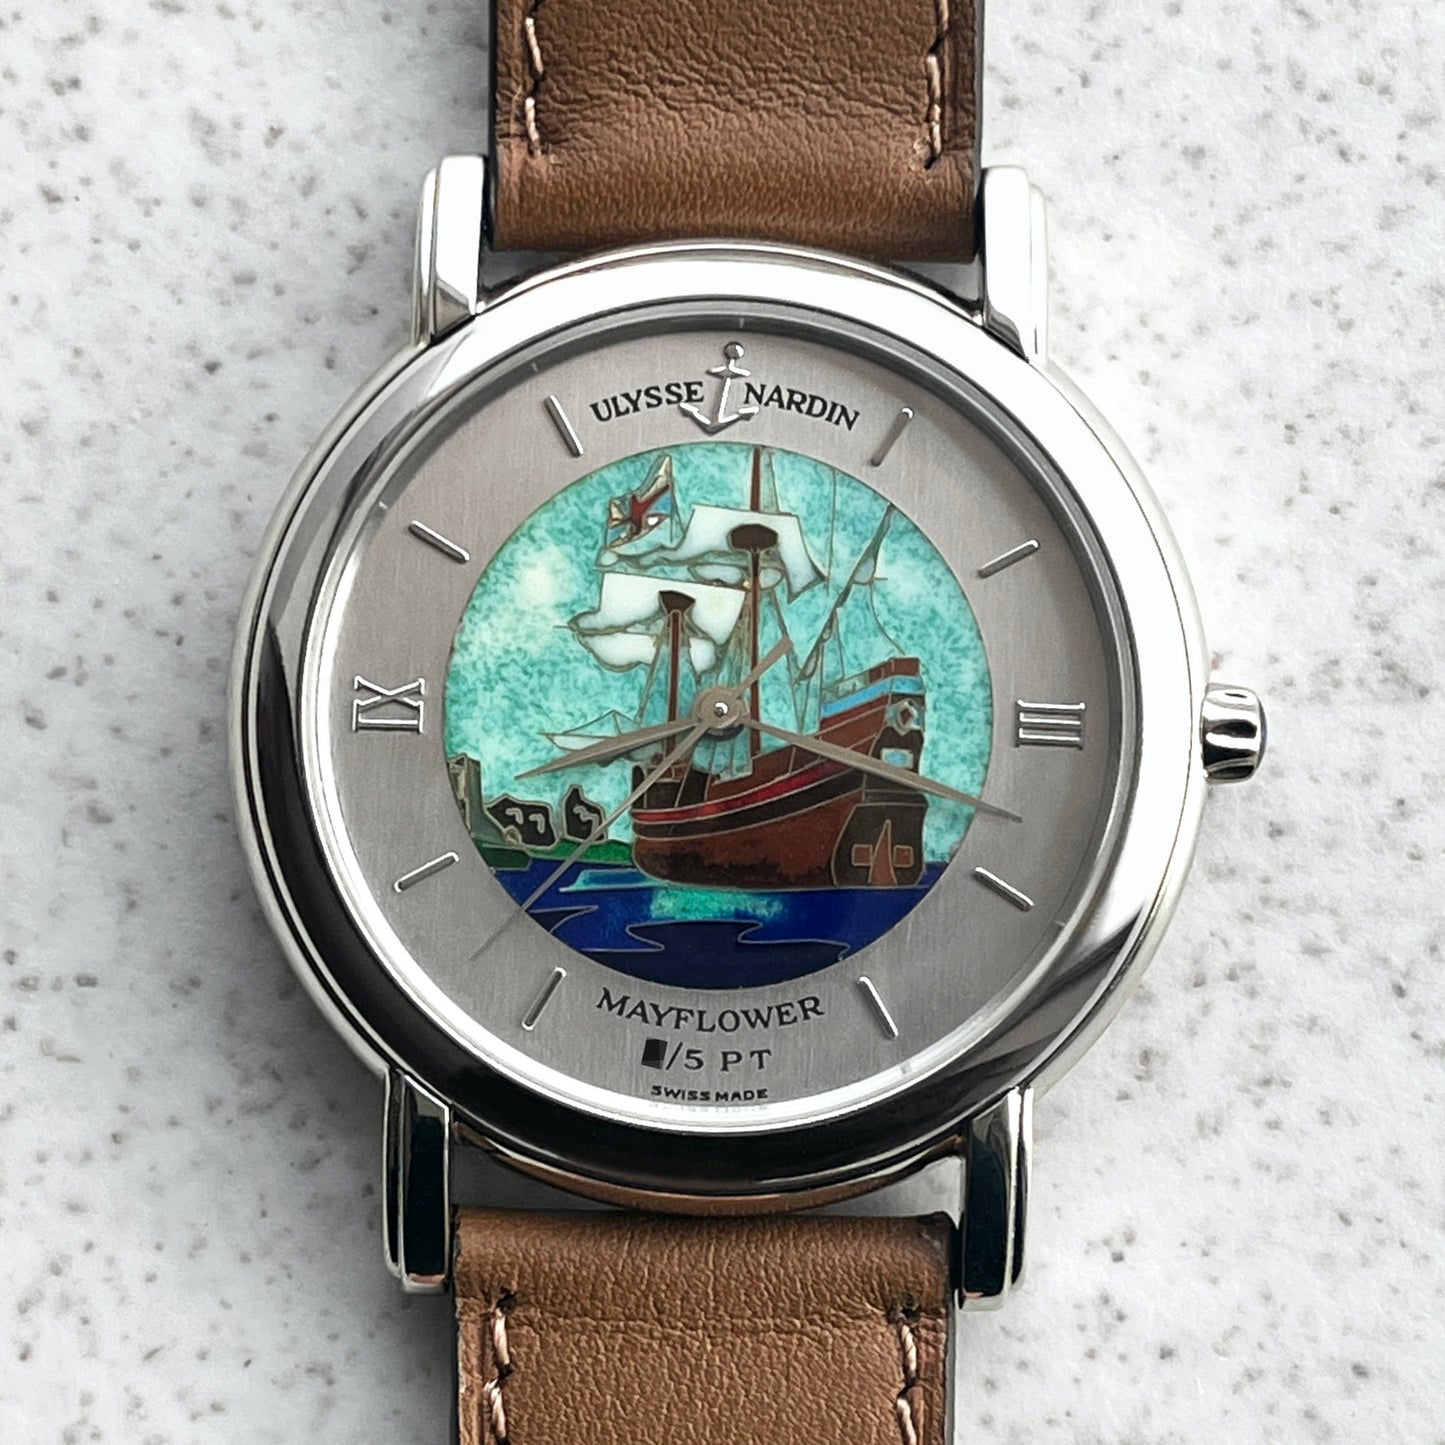 Ulysse Nardin Rare and Limited Wristwatch with "Mayflower" Cloisonné Enamel Dial, Platinum